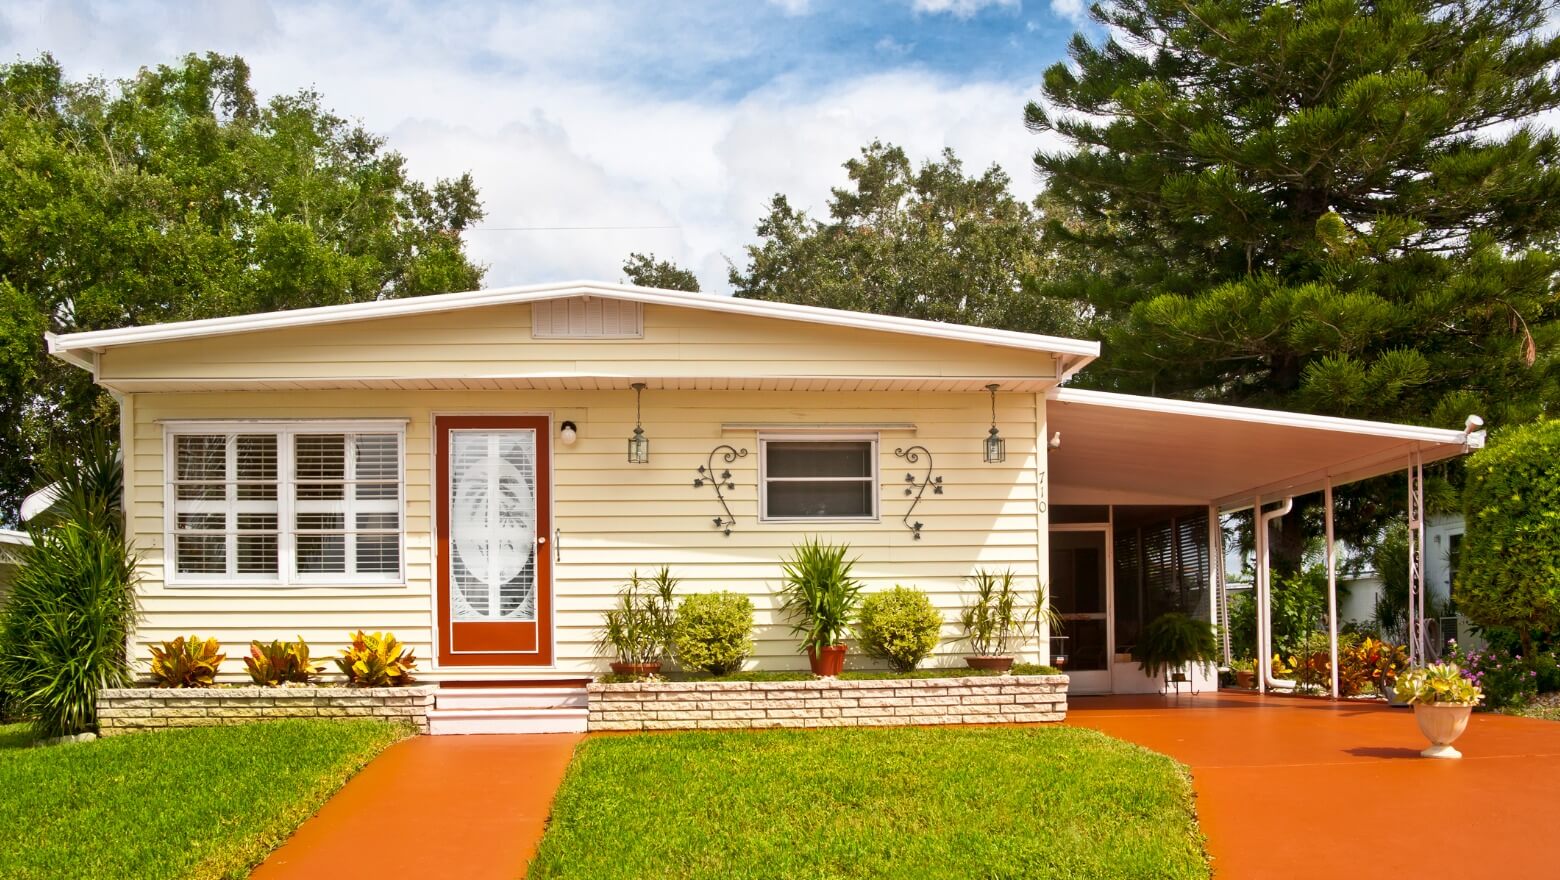 The Differences Between Mobile Homes vs Manufactured Homes